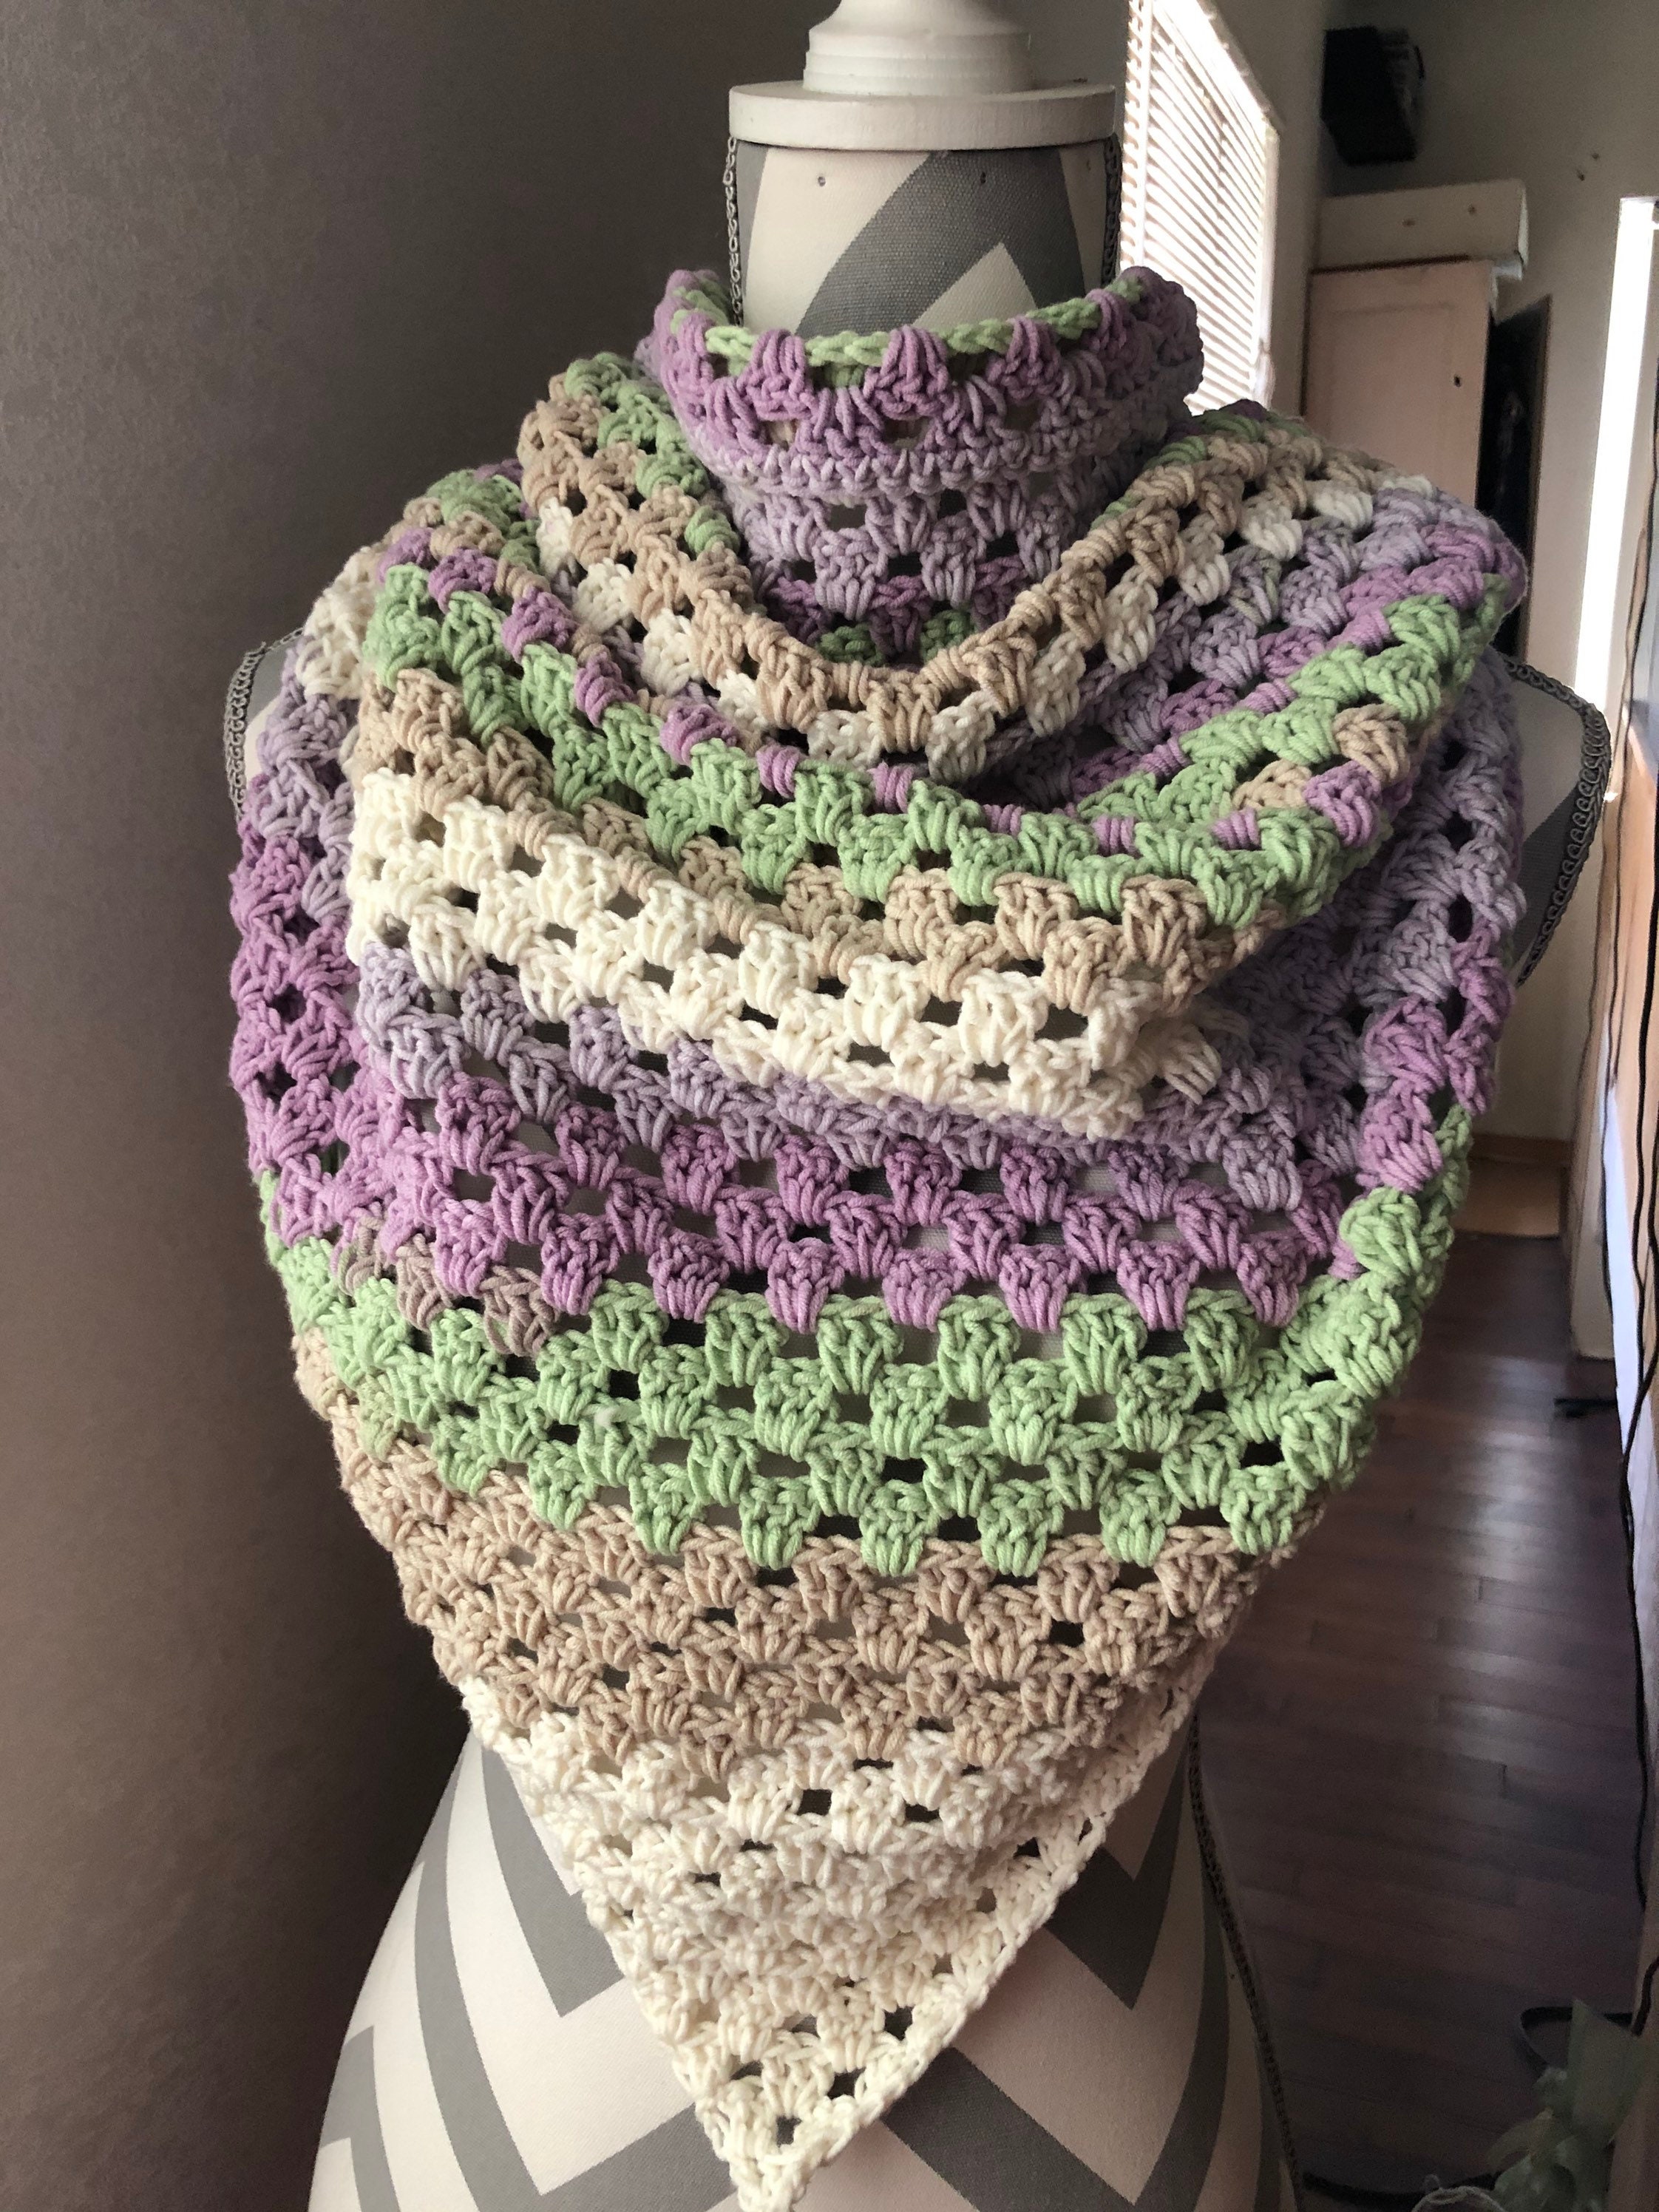 Latest WIP, a gift shawl made with Caron Latte Cakes in Earl Grey, it's  very soft and I'm super excited about it!☺️ : r/crochet